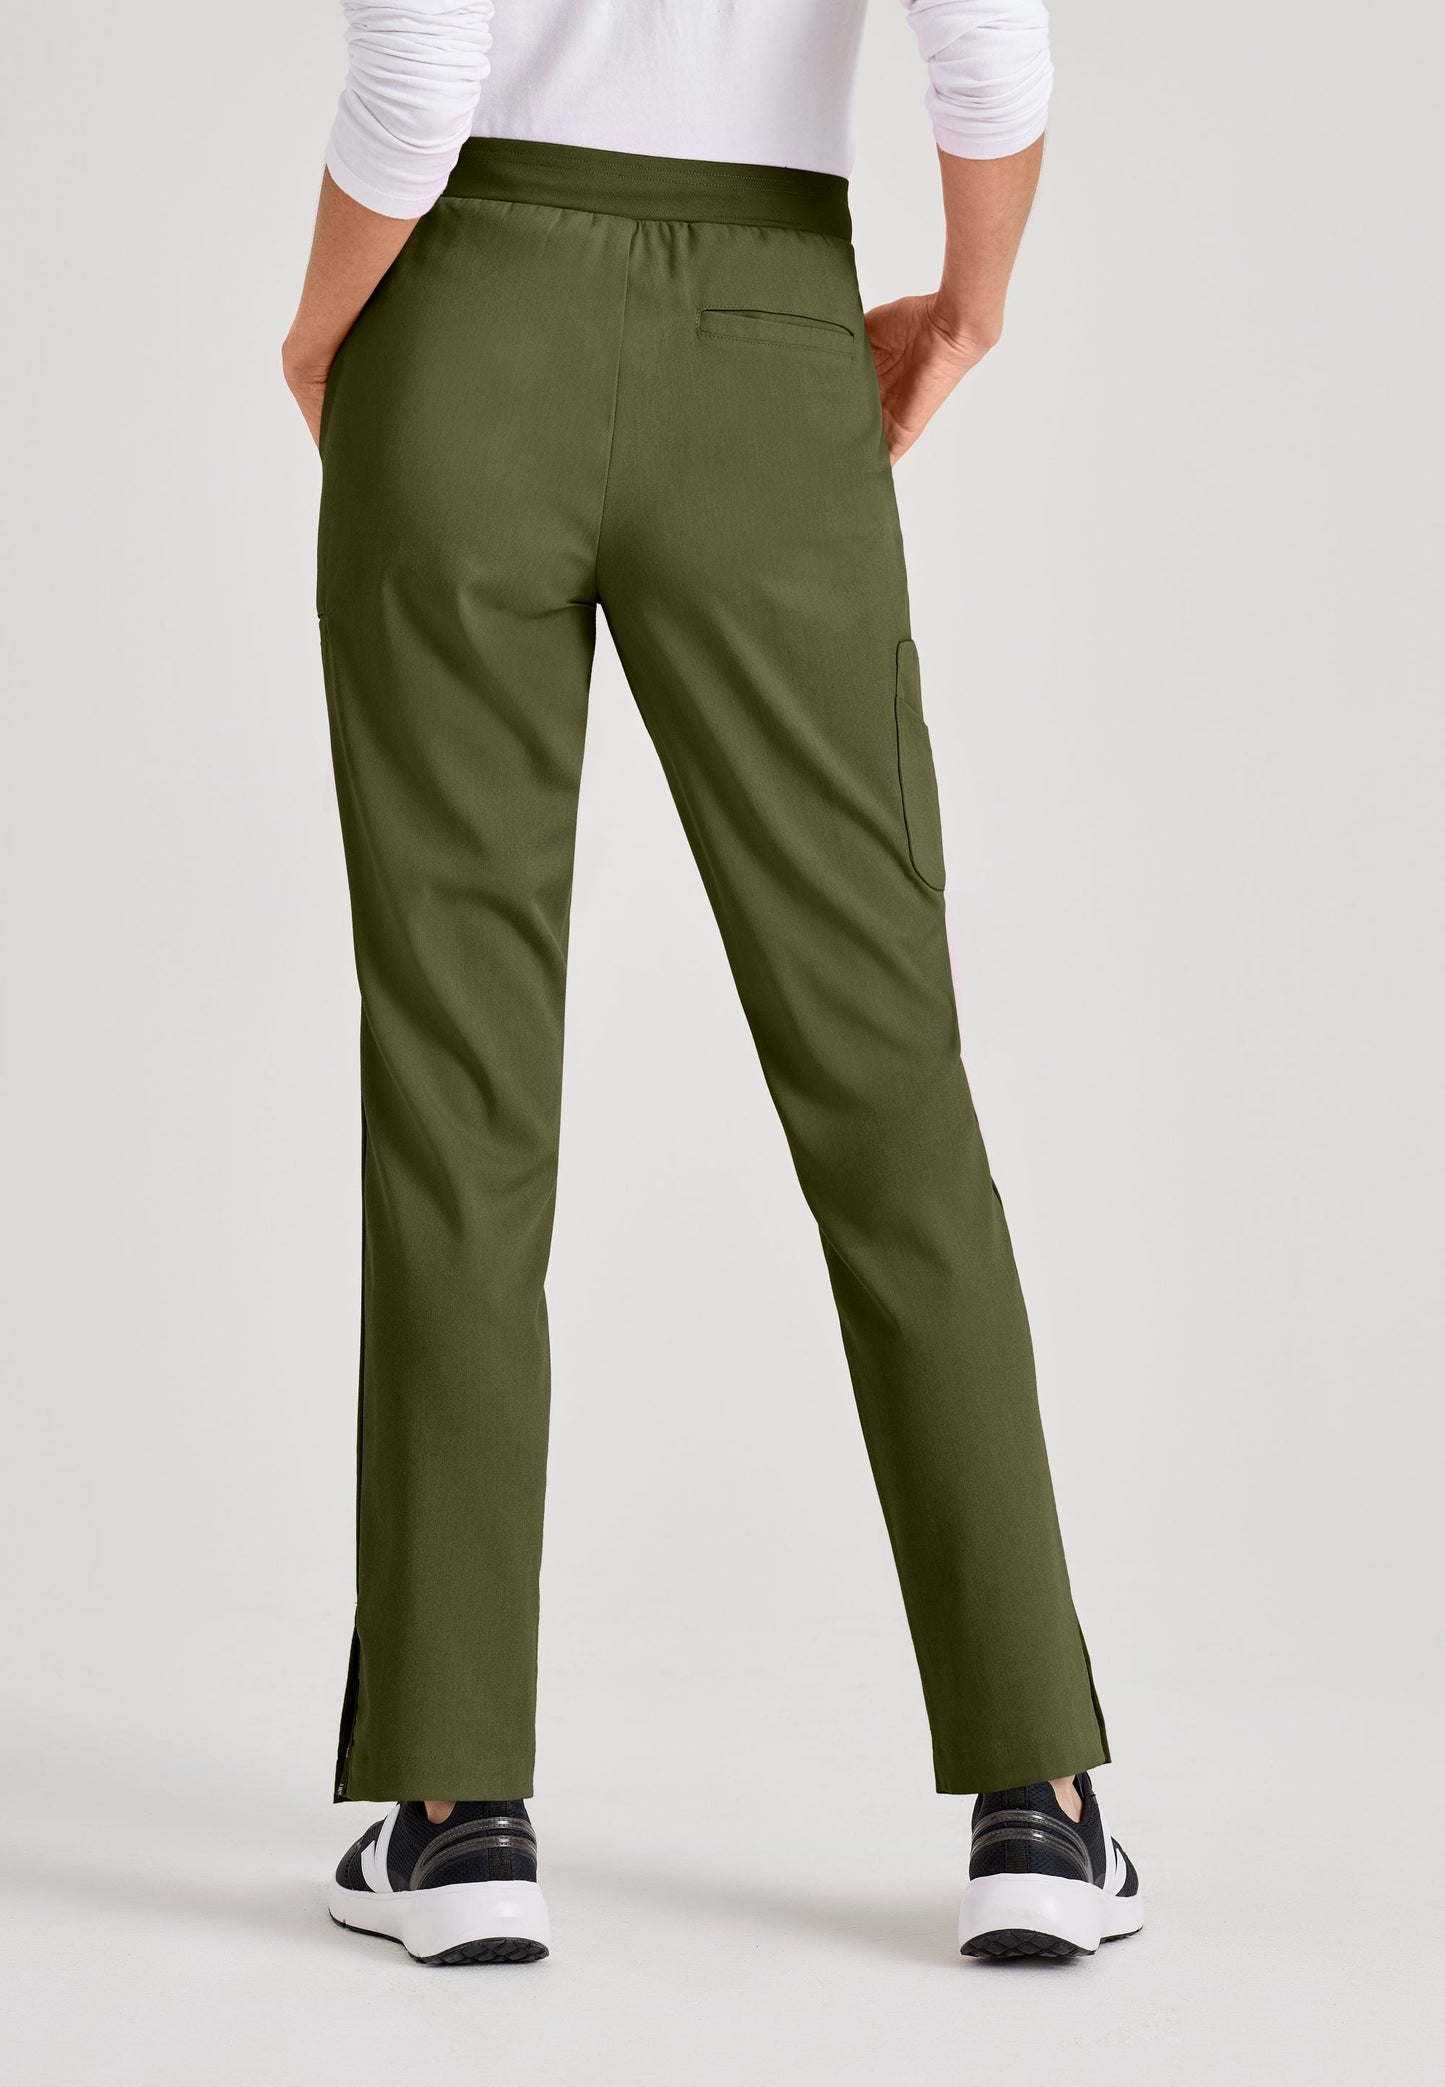 Barco Grey's Anatomy +SpandexStretch GRSP526 Serena Tapered Pant Olive Back